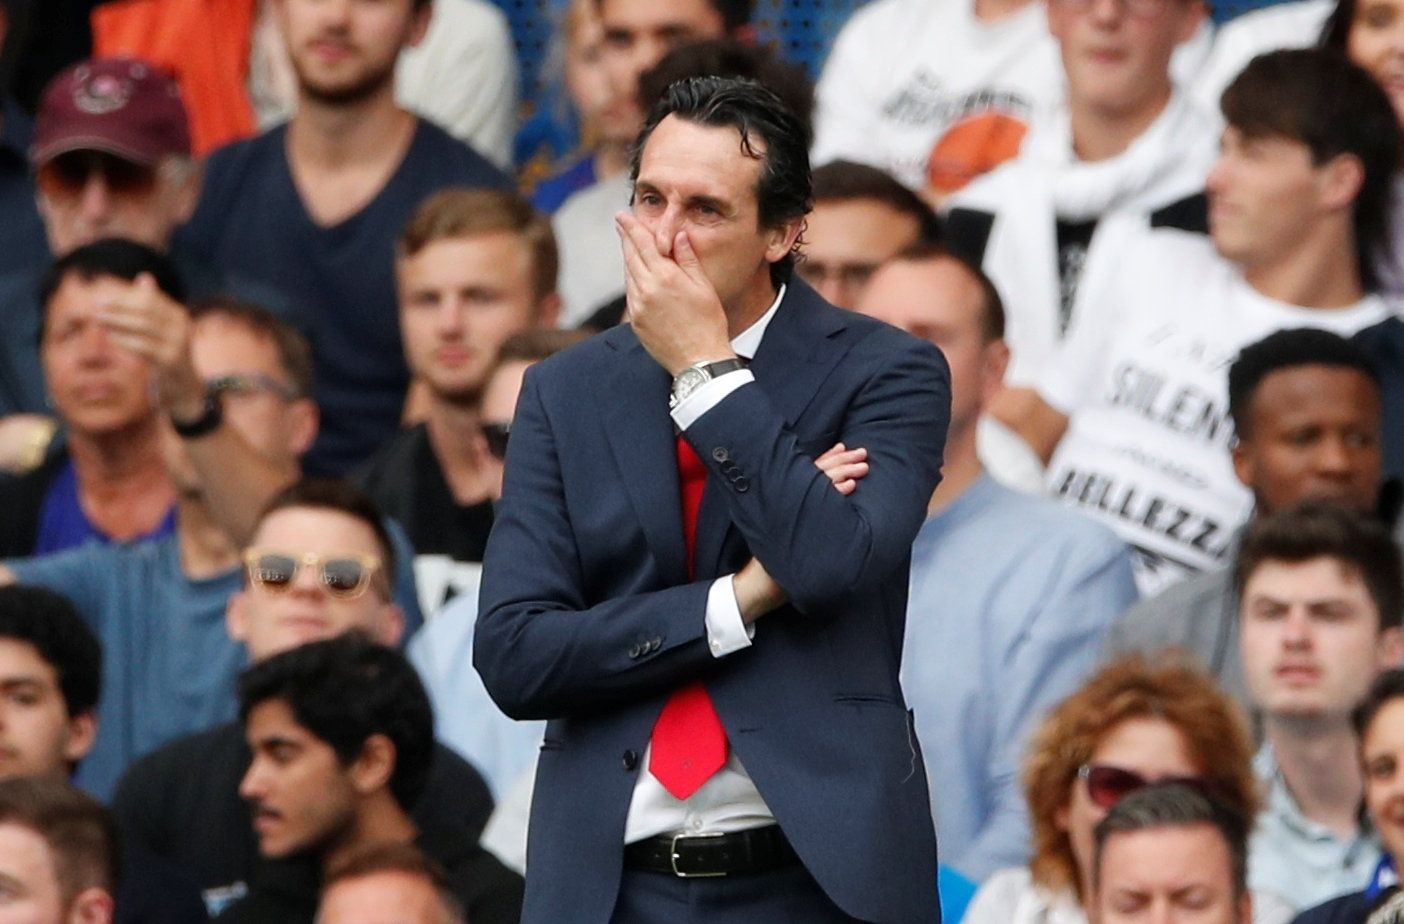 Soccer Football - Premier League - Chelsea v Arsenal - Stamford Bridge, London, Britain - August 18, 2018  Arsenal manager Unai Emery looks dejected during the match  Action Images via Reuters/John Sibley  EDITORIAL USE ONLY. No use with unauthorized audio, video, data, fixture lists, club/league logos or 